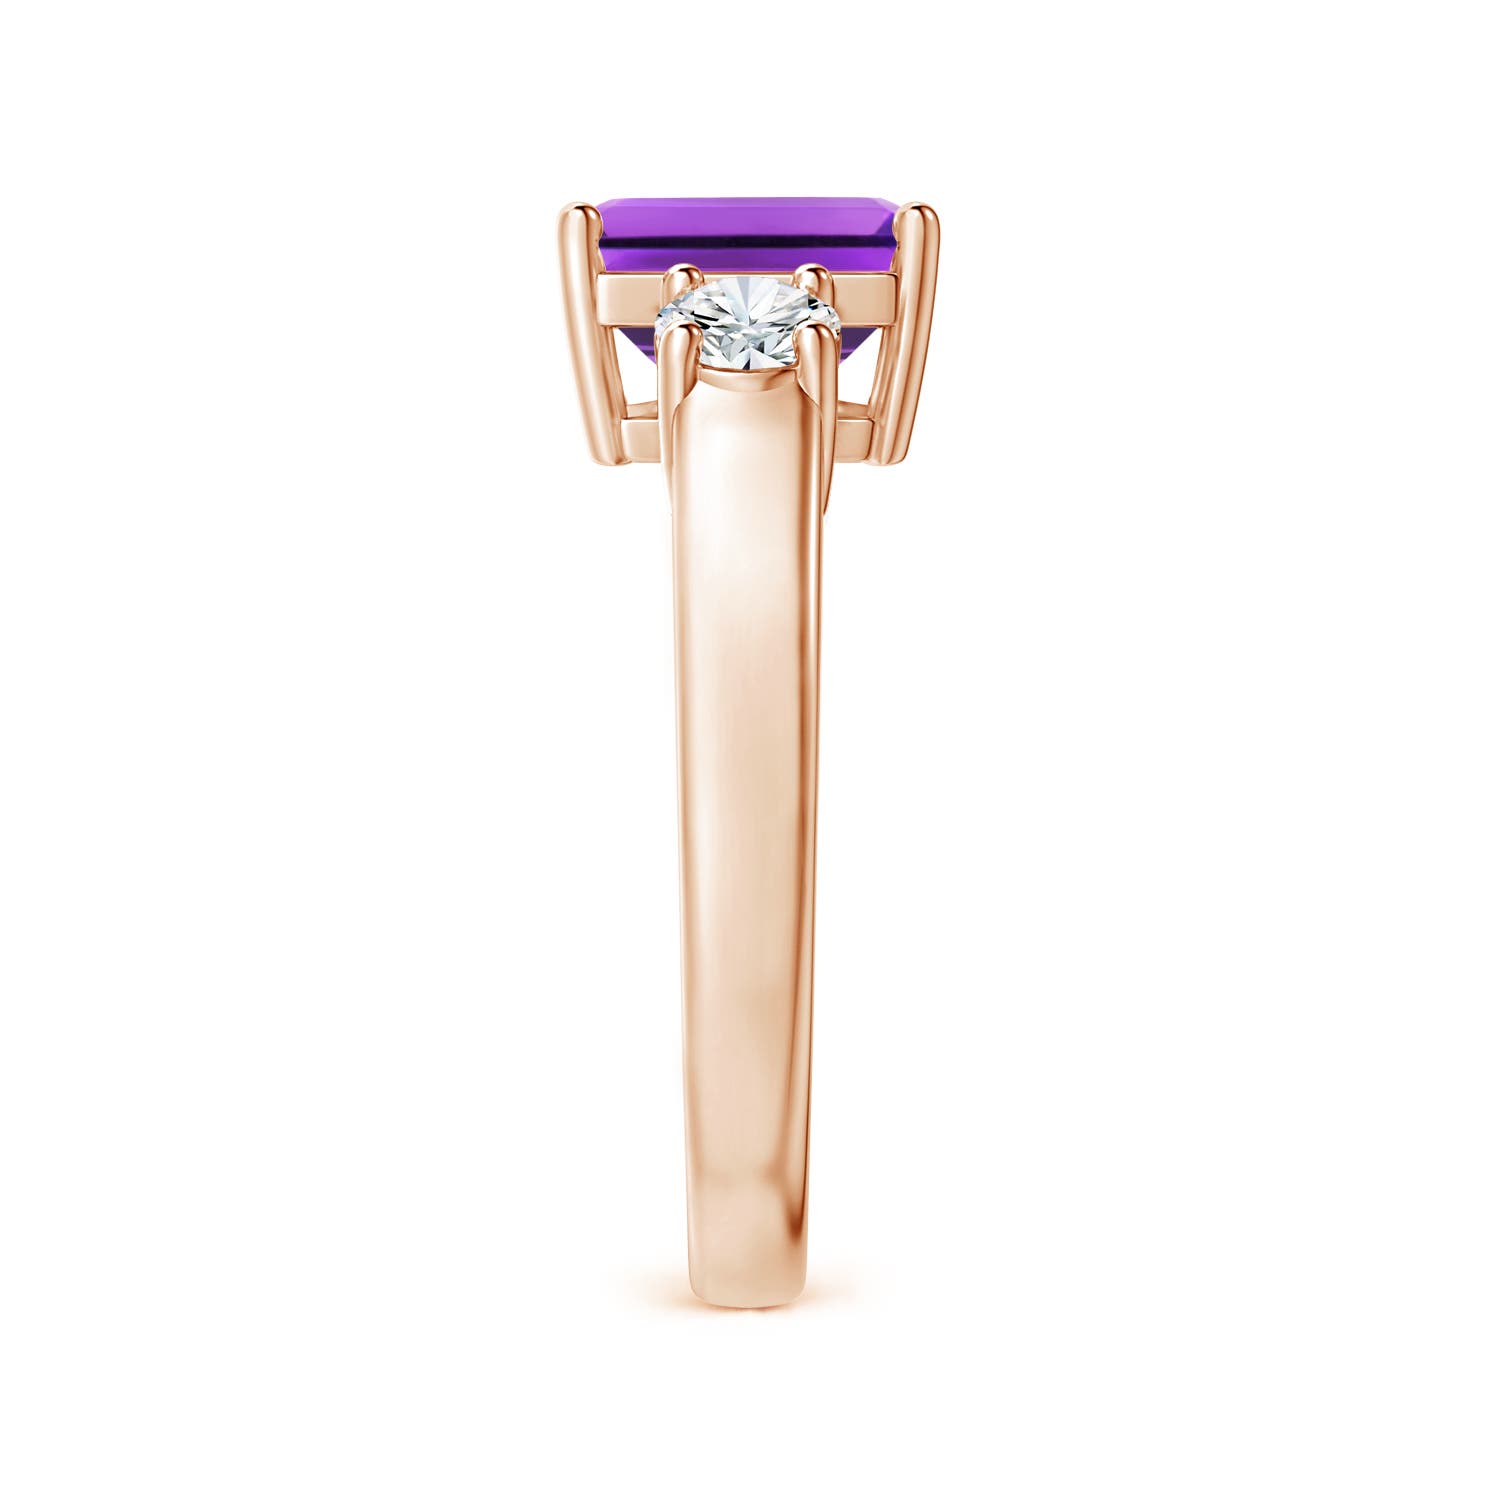 AAA - Amethyst / 2.46 CT / 14 KT Rose Gold